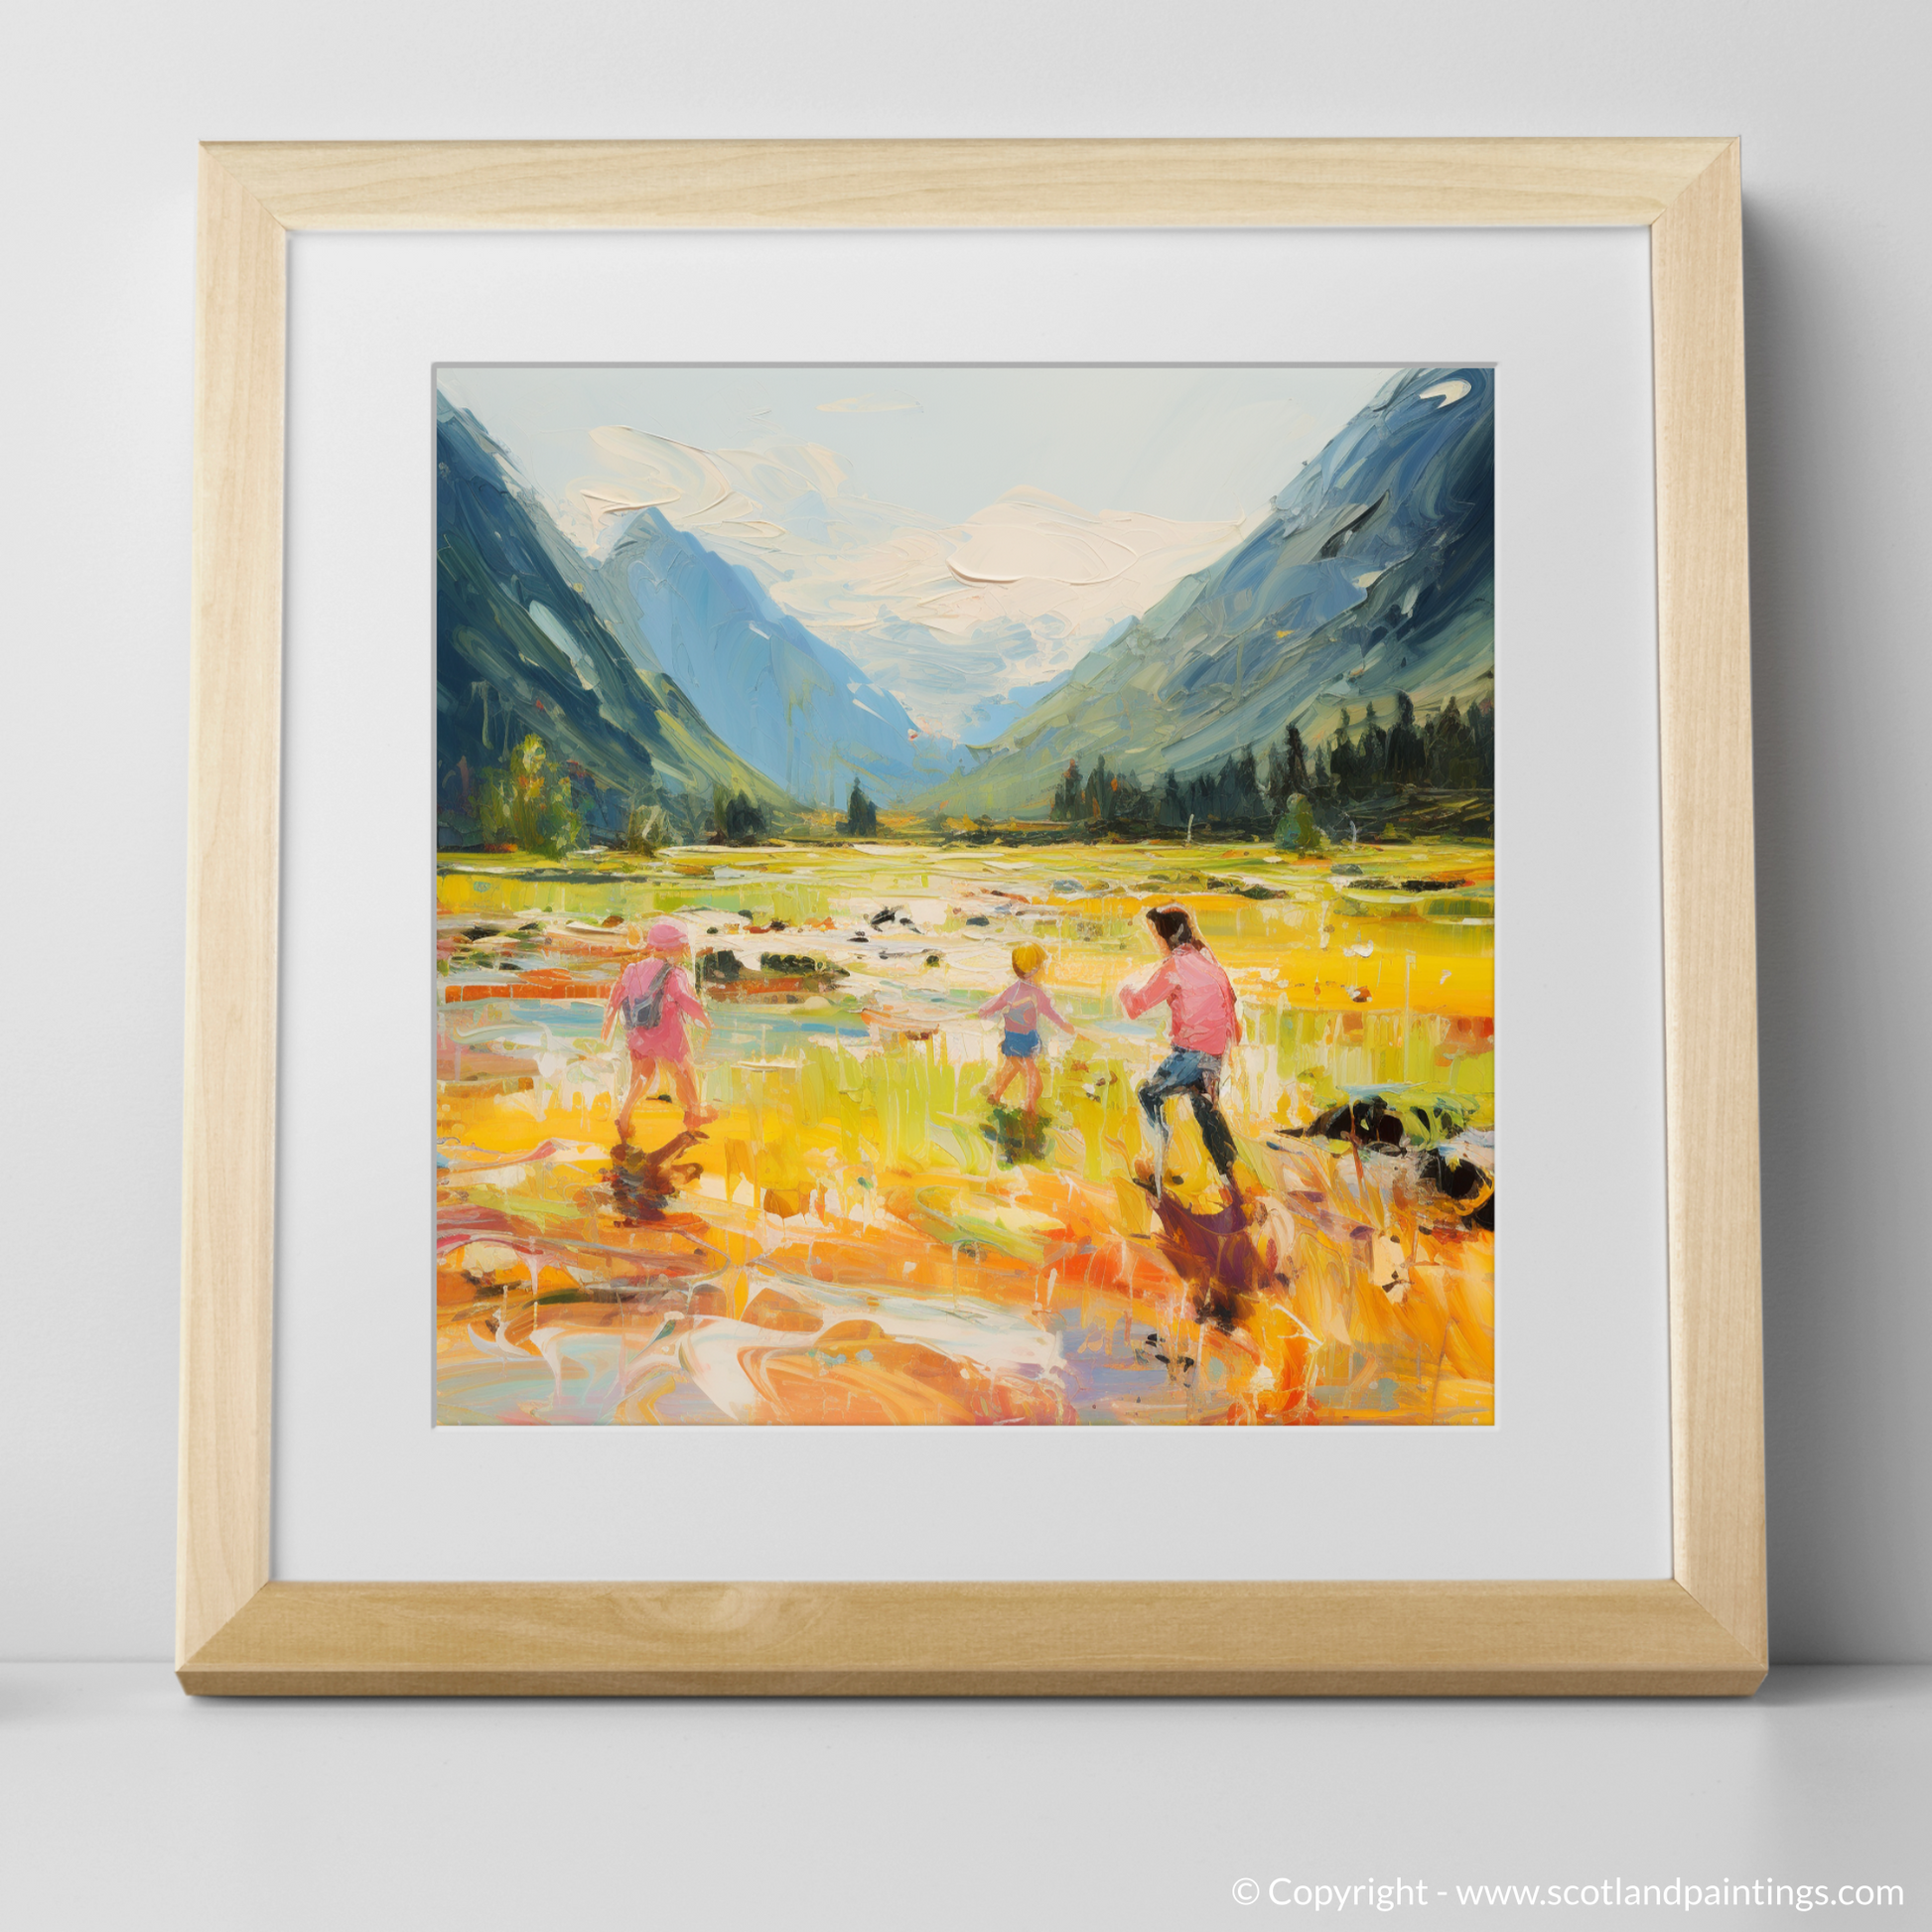 Art Print of Children playing in Glencoe during summer with a natural frame